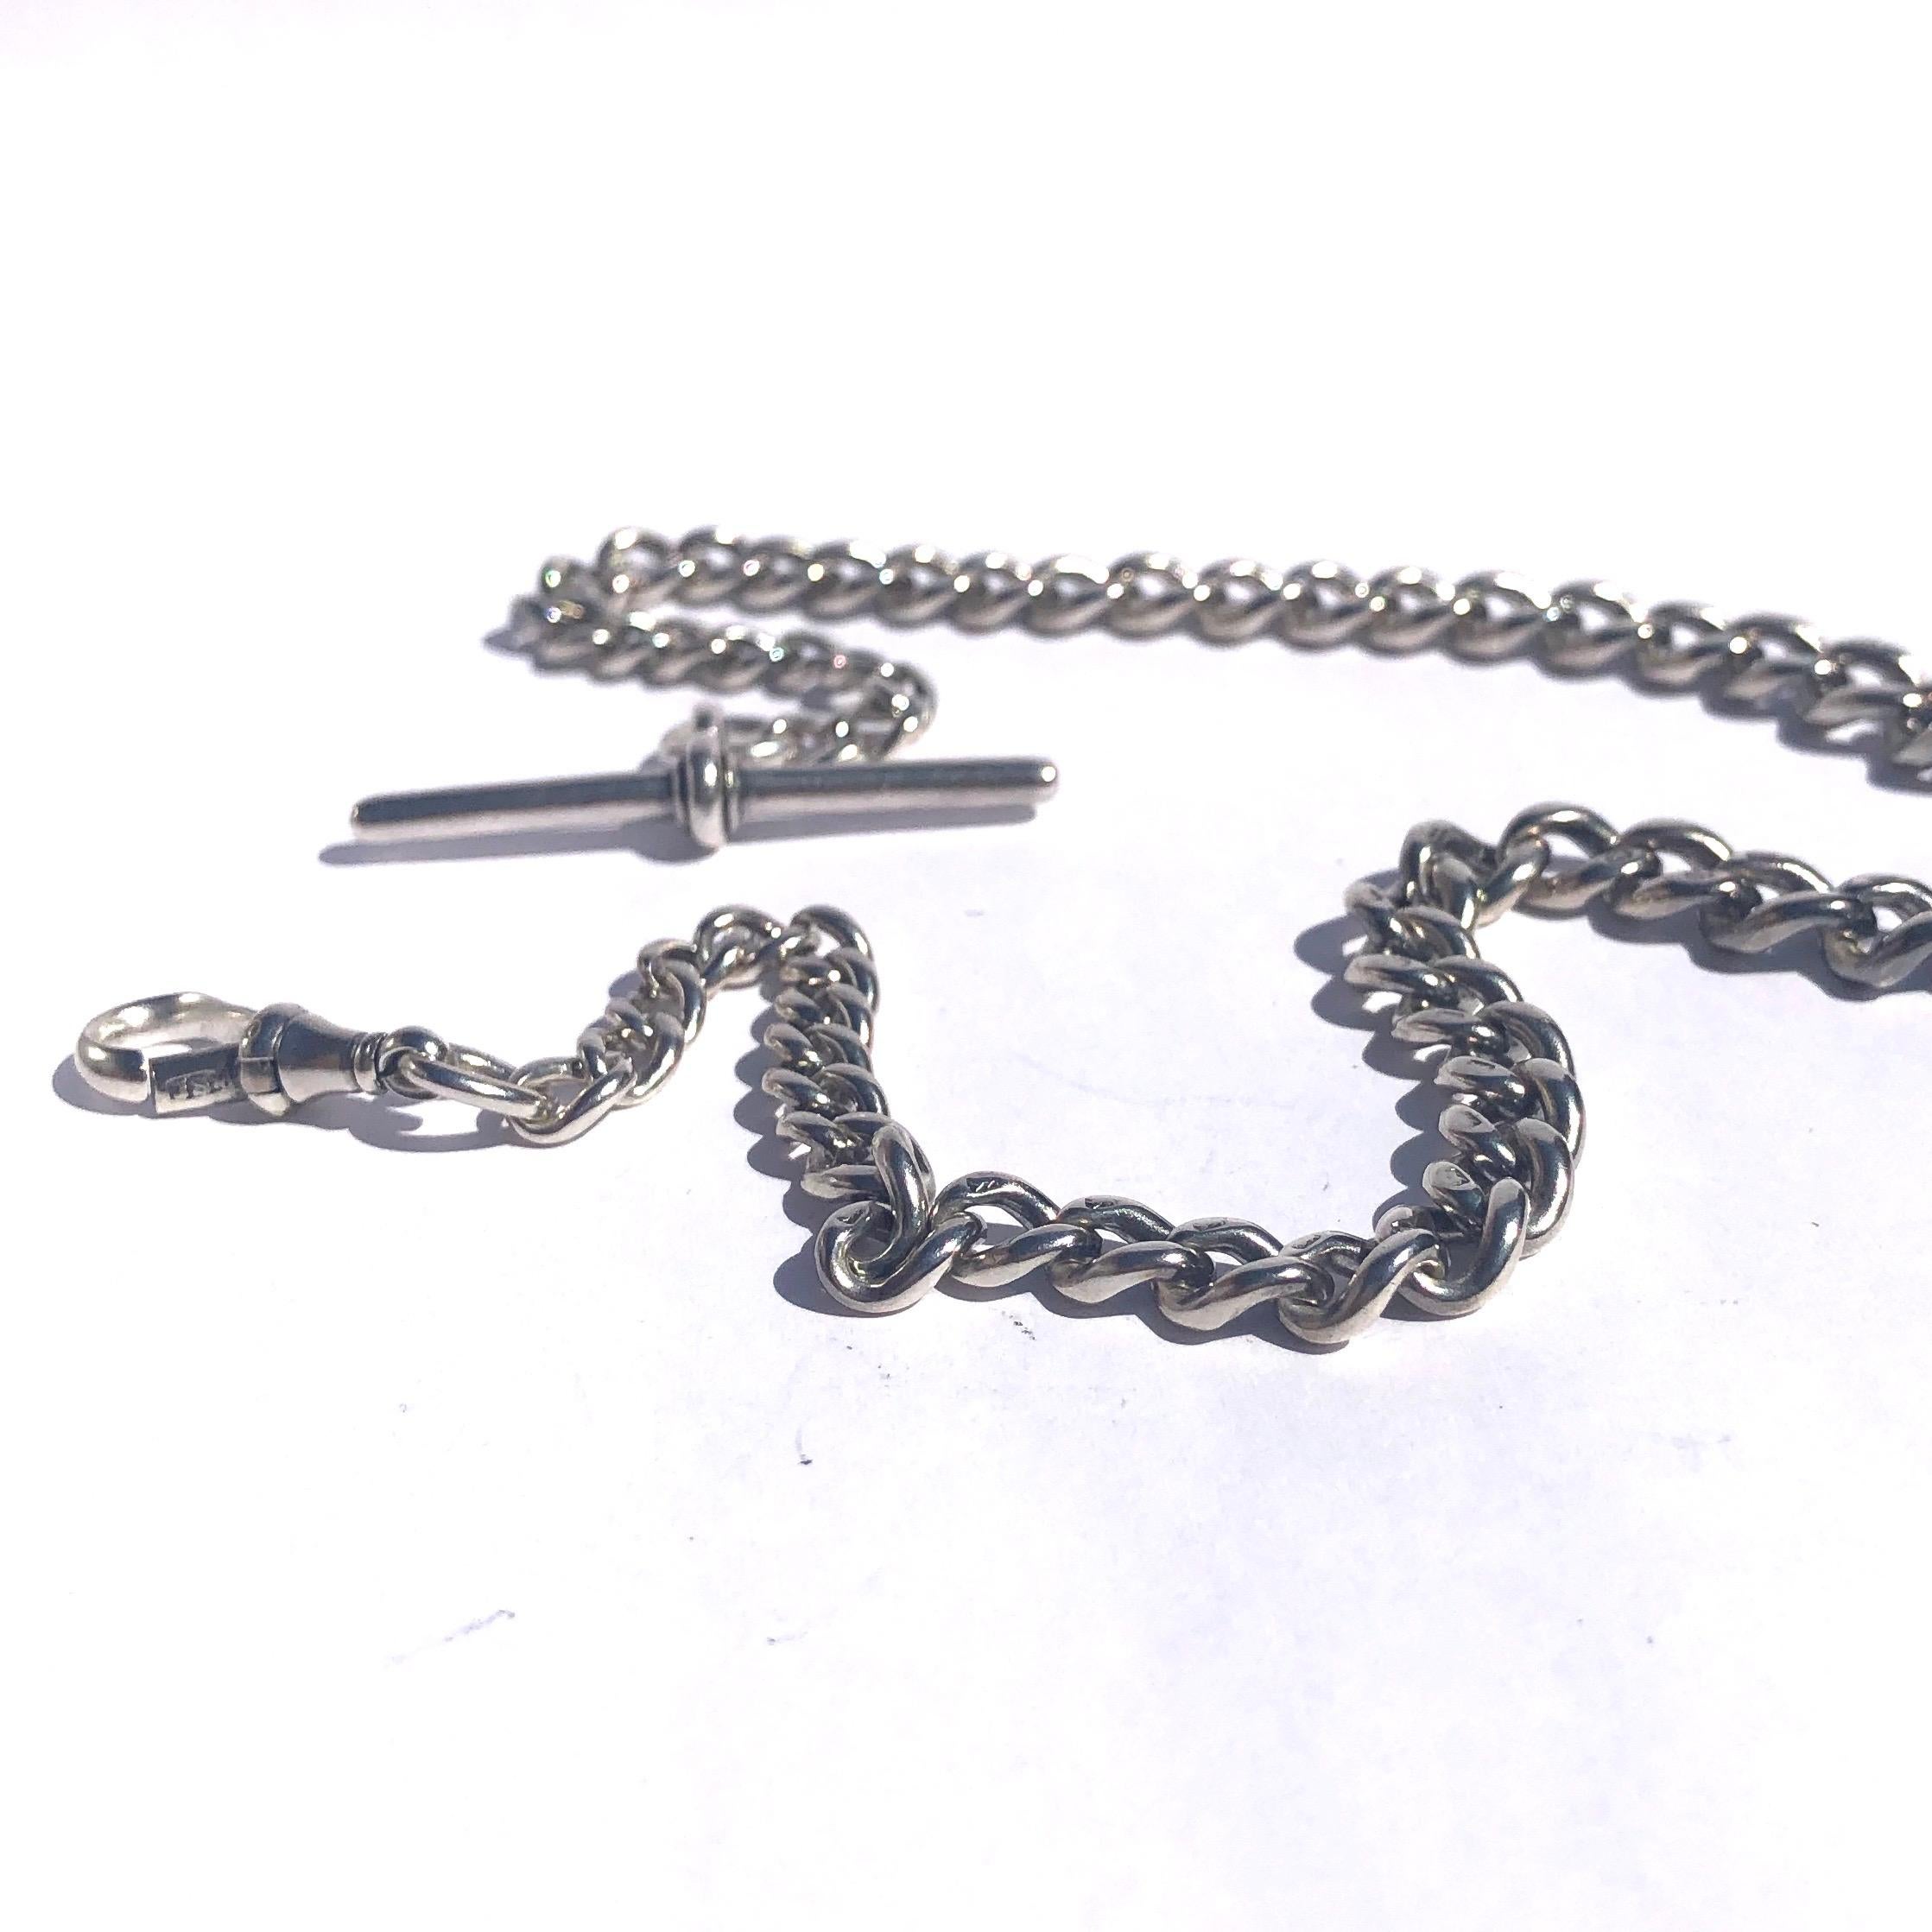 An Albert chain is an essential in any gents wardrobe. This particular Albert  is simple with a dog clip one end and a t-bar on the other. 

Length: 36cm 

Weight: 30.7g